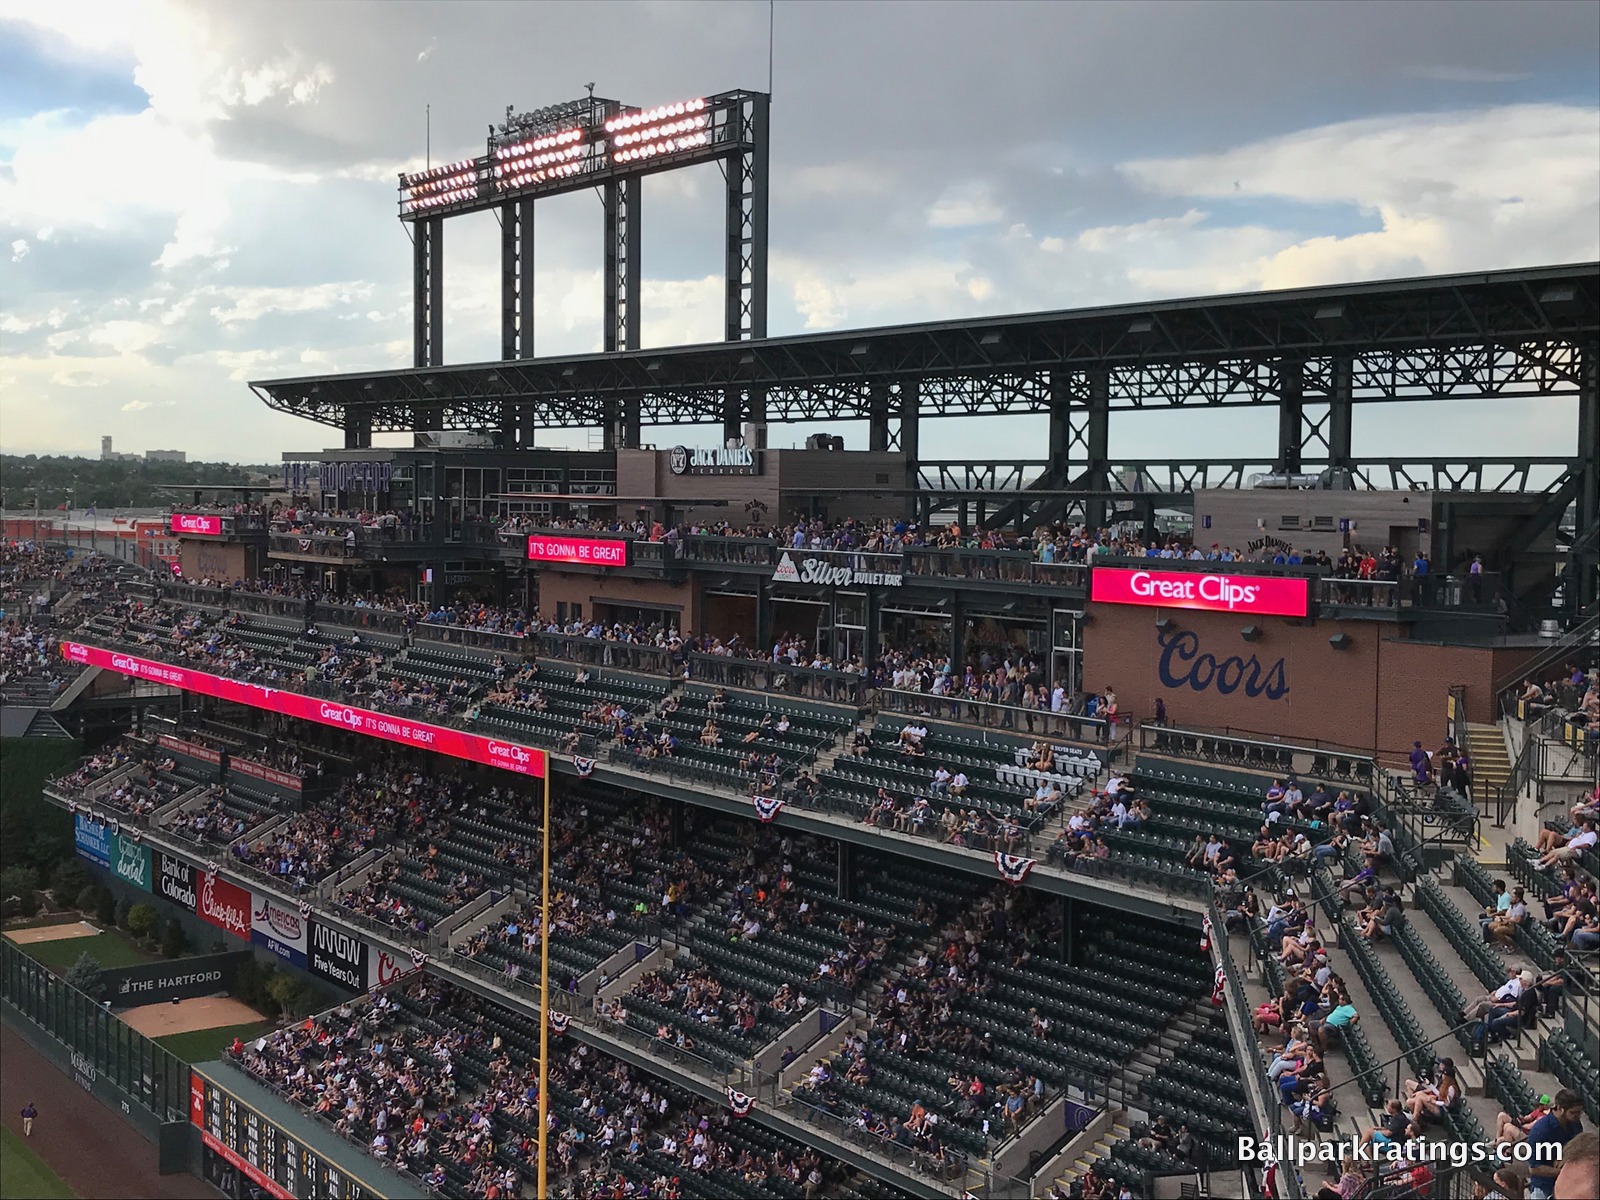 The Rooftop Coors Field